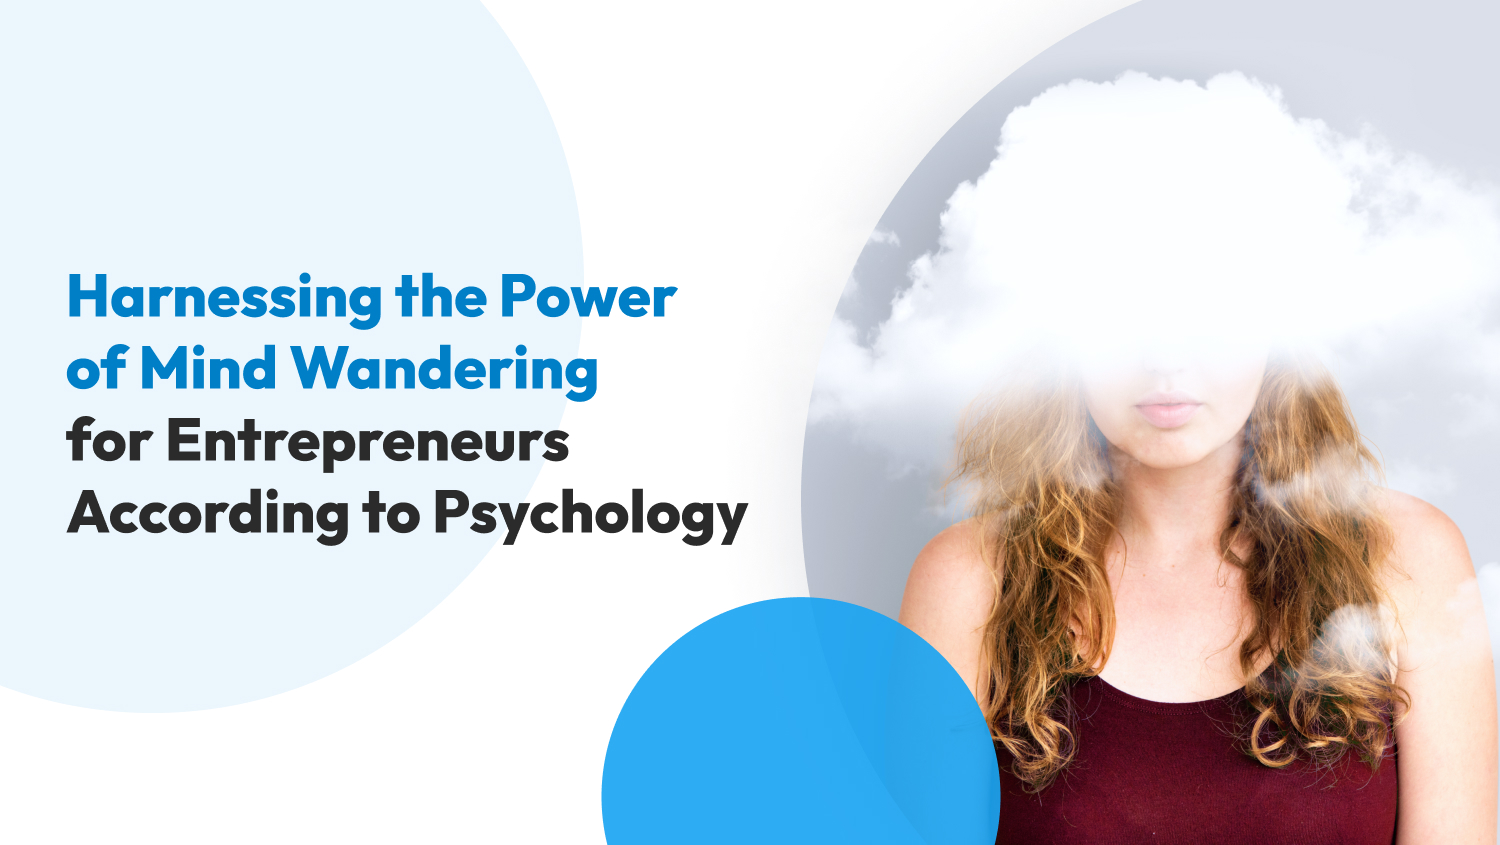 Harnessing the Power of Mind Wandering for Entrepreneurs According to Psychology